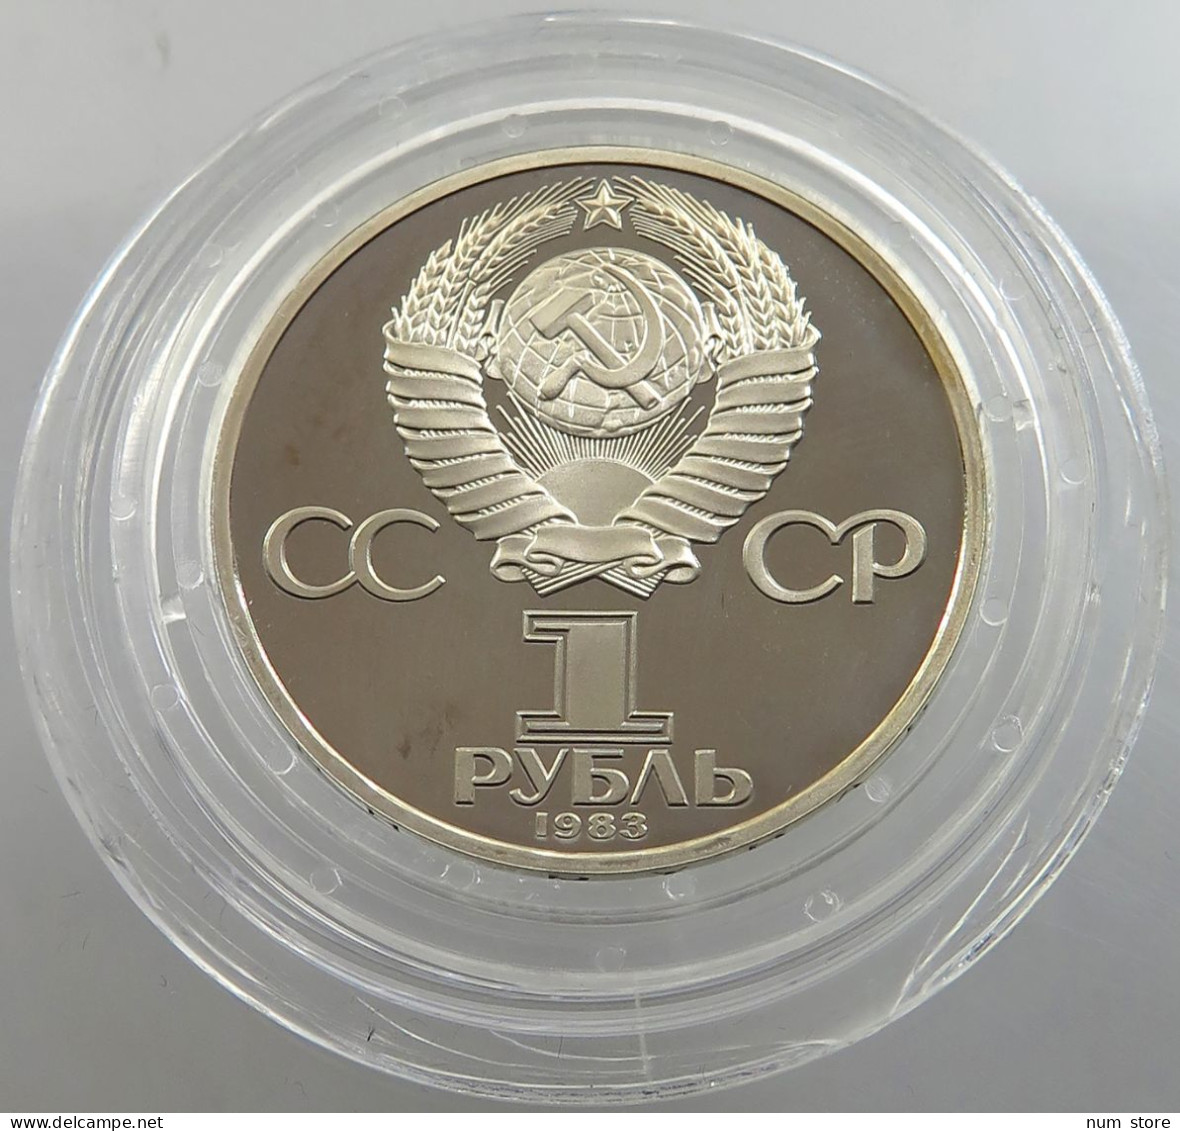 RUSSIA USSR 1 ROUBLE 1983 WITHOUT 1988 ON EDGE MARX PROOF #sm14 0335 - Rusland